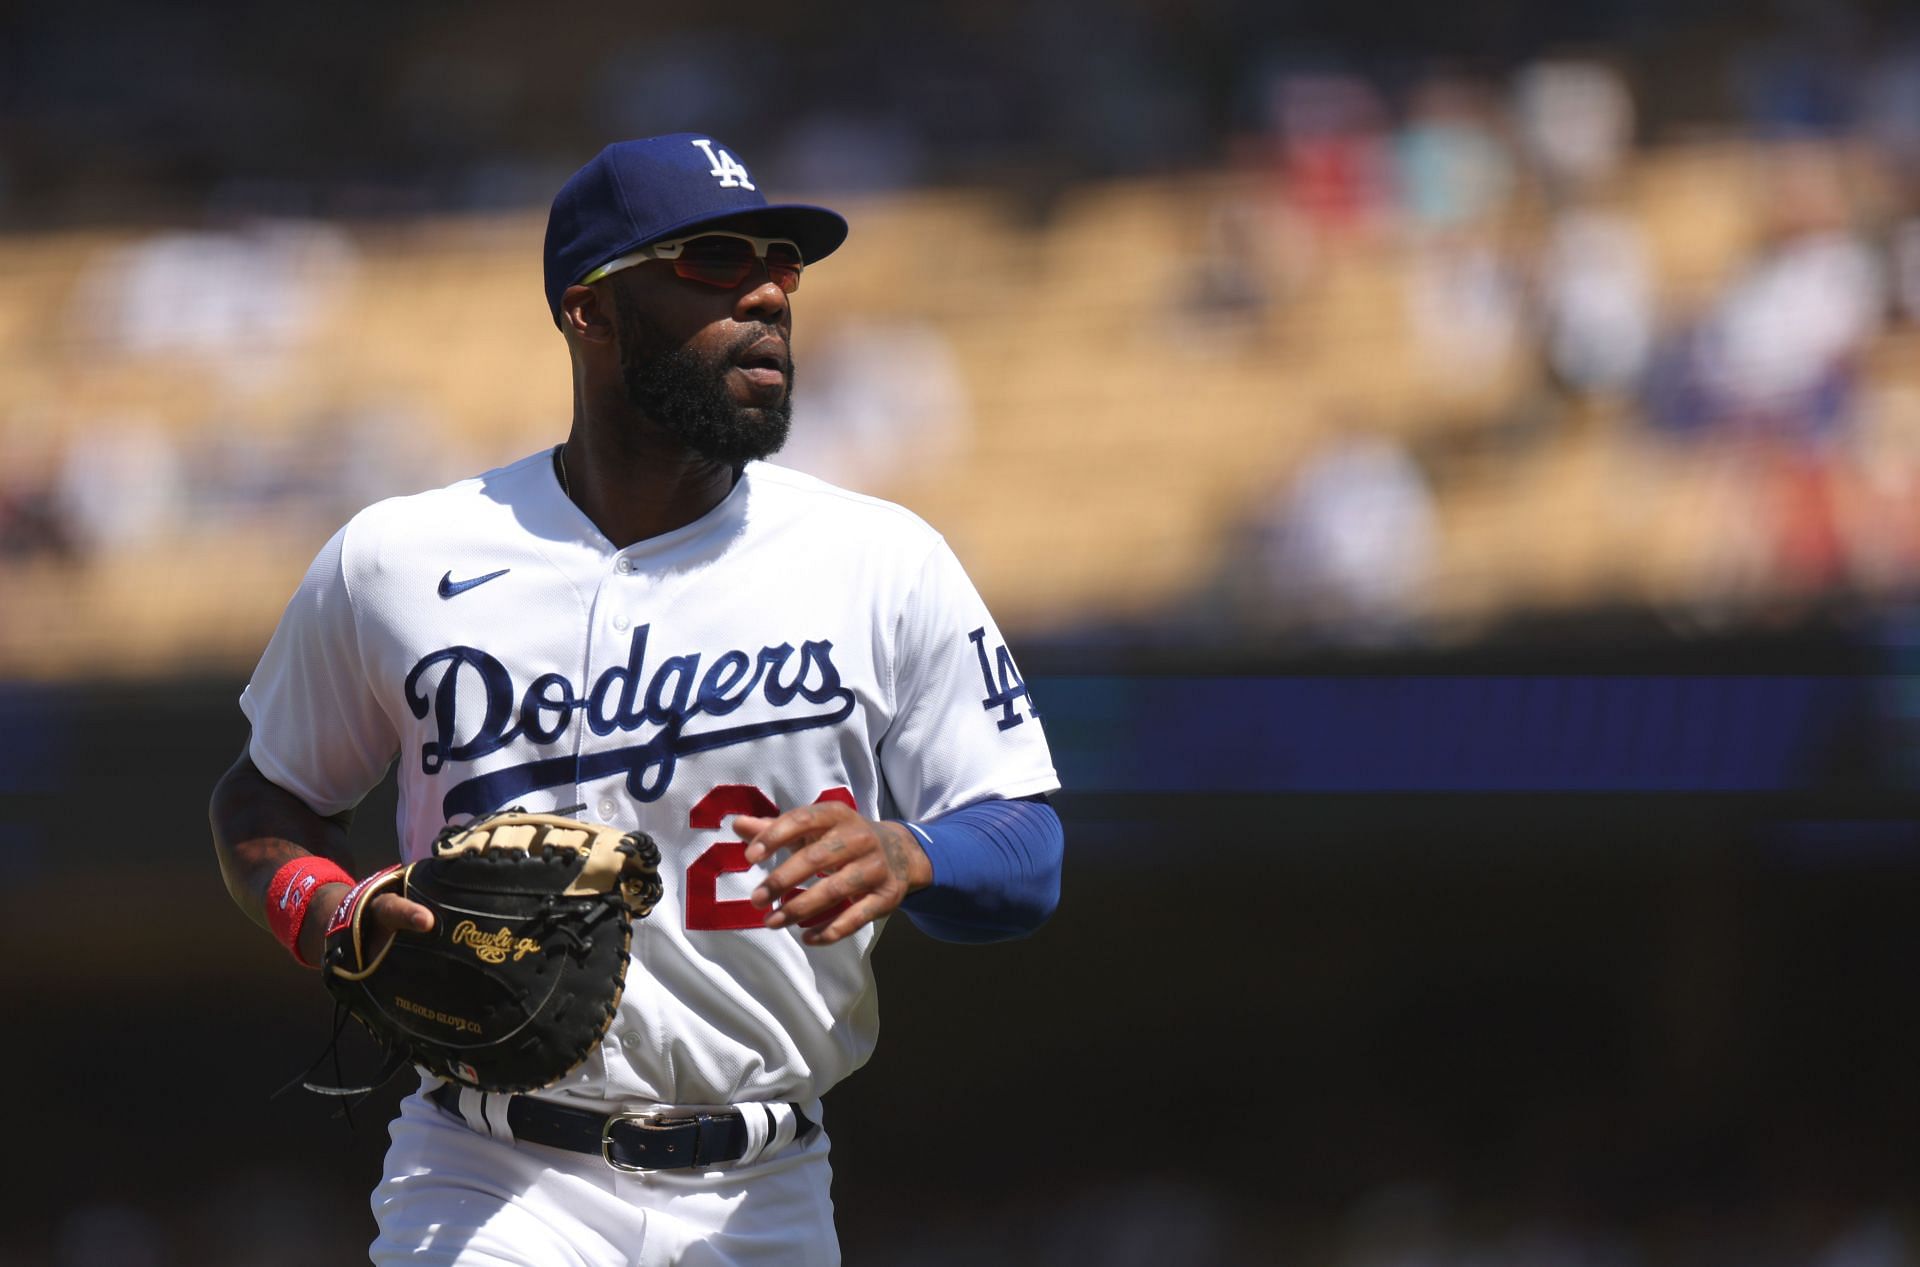 Jason Heyward is struggling with the Dodgers right now